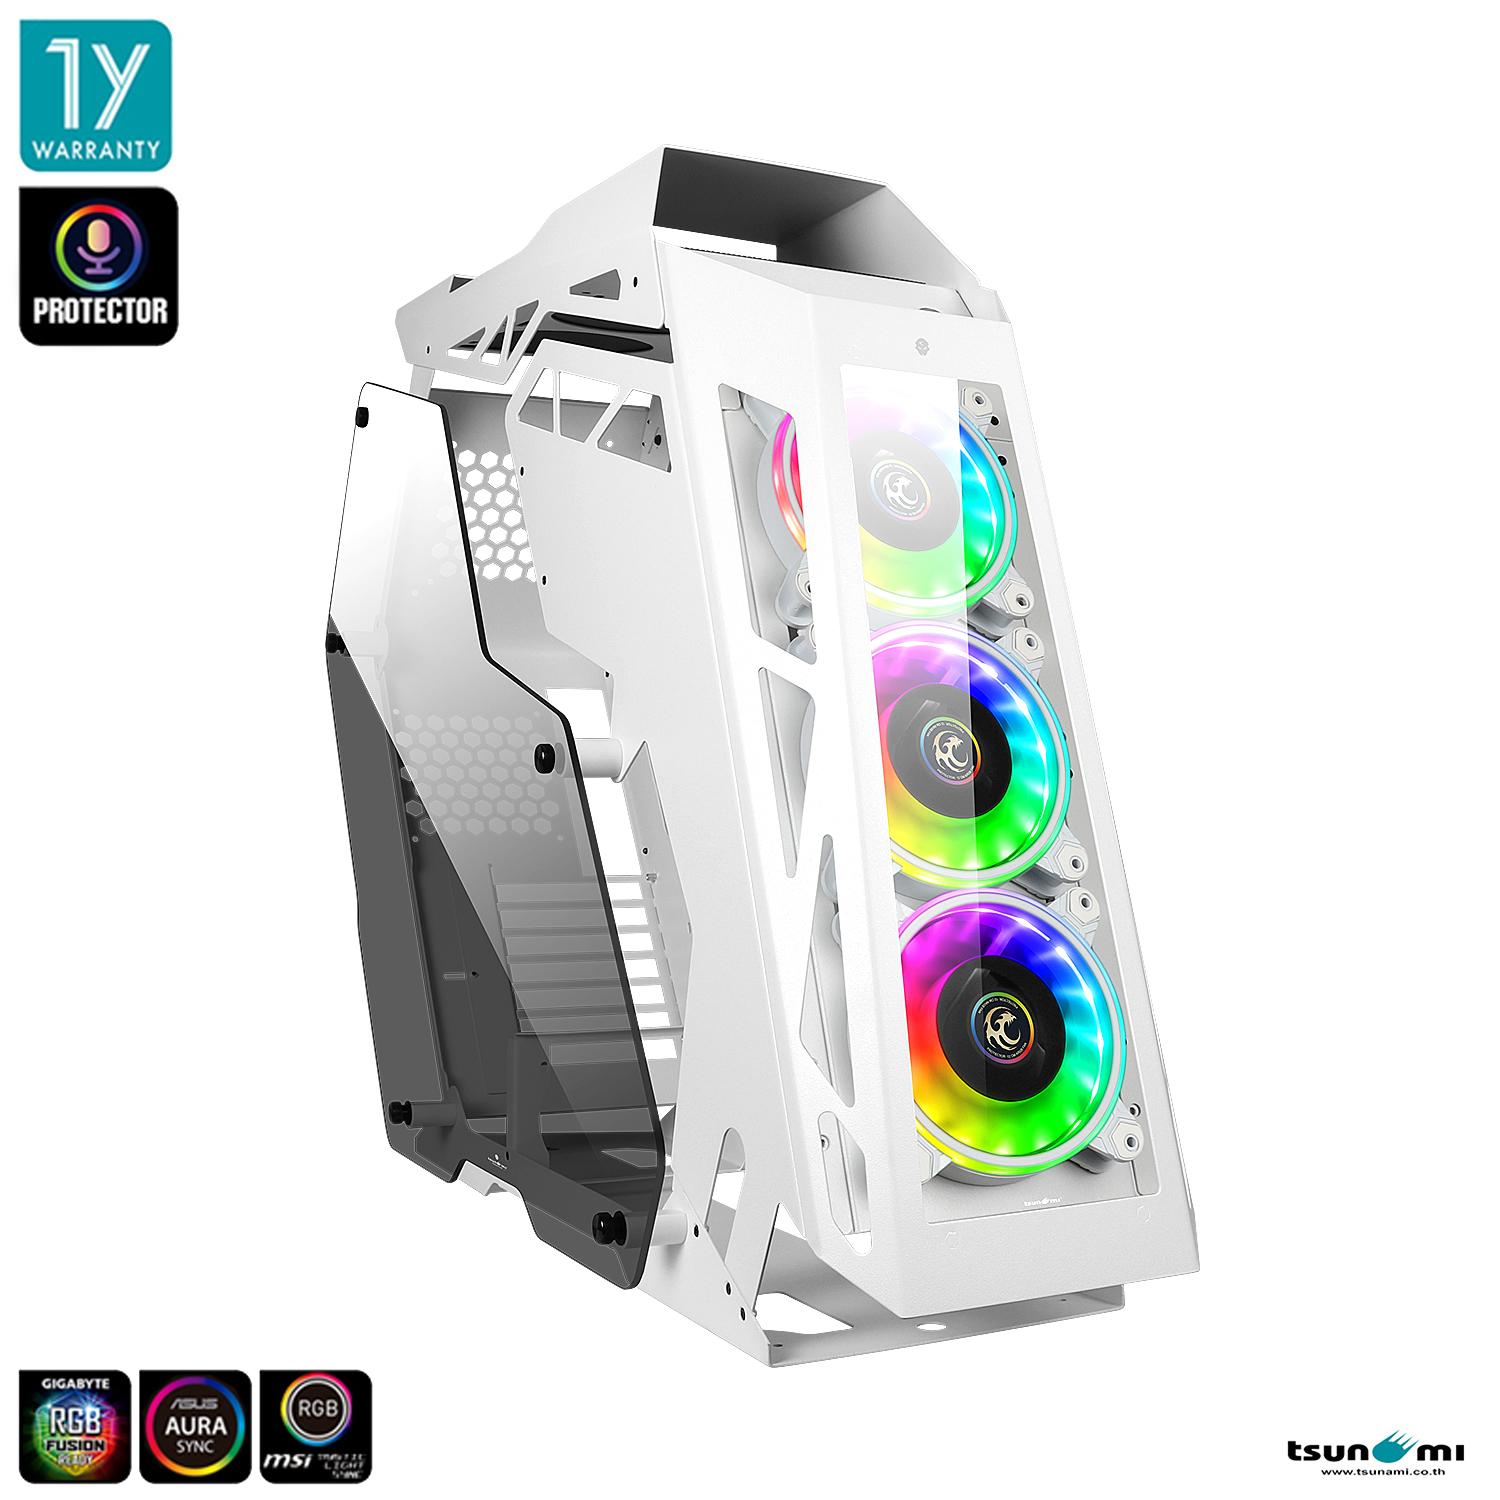 Tsunami (เคส เกมมิ่ง) Protector Titan WW Open Air Surrounded Tempered Glass Mutant ATX Gaming Computer Case with Protector 1262W Cooling Fan with Hub (ARGB/Protector RGB Ready)